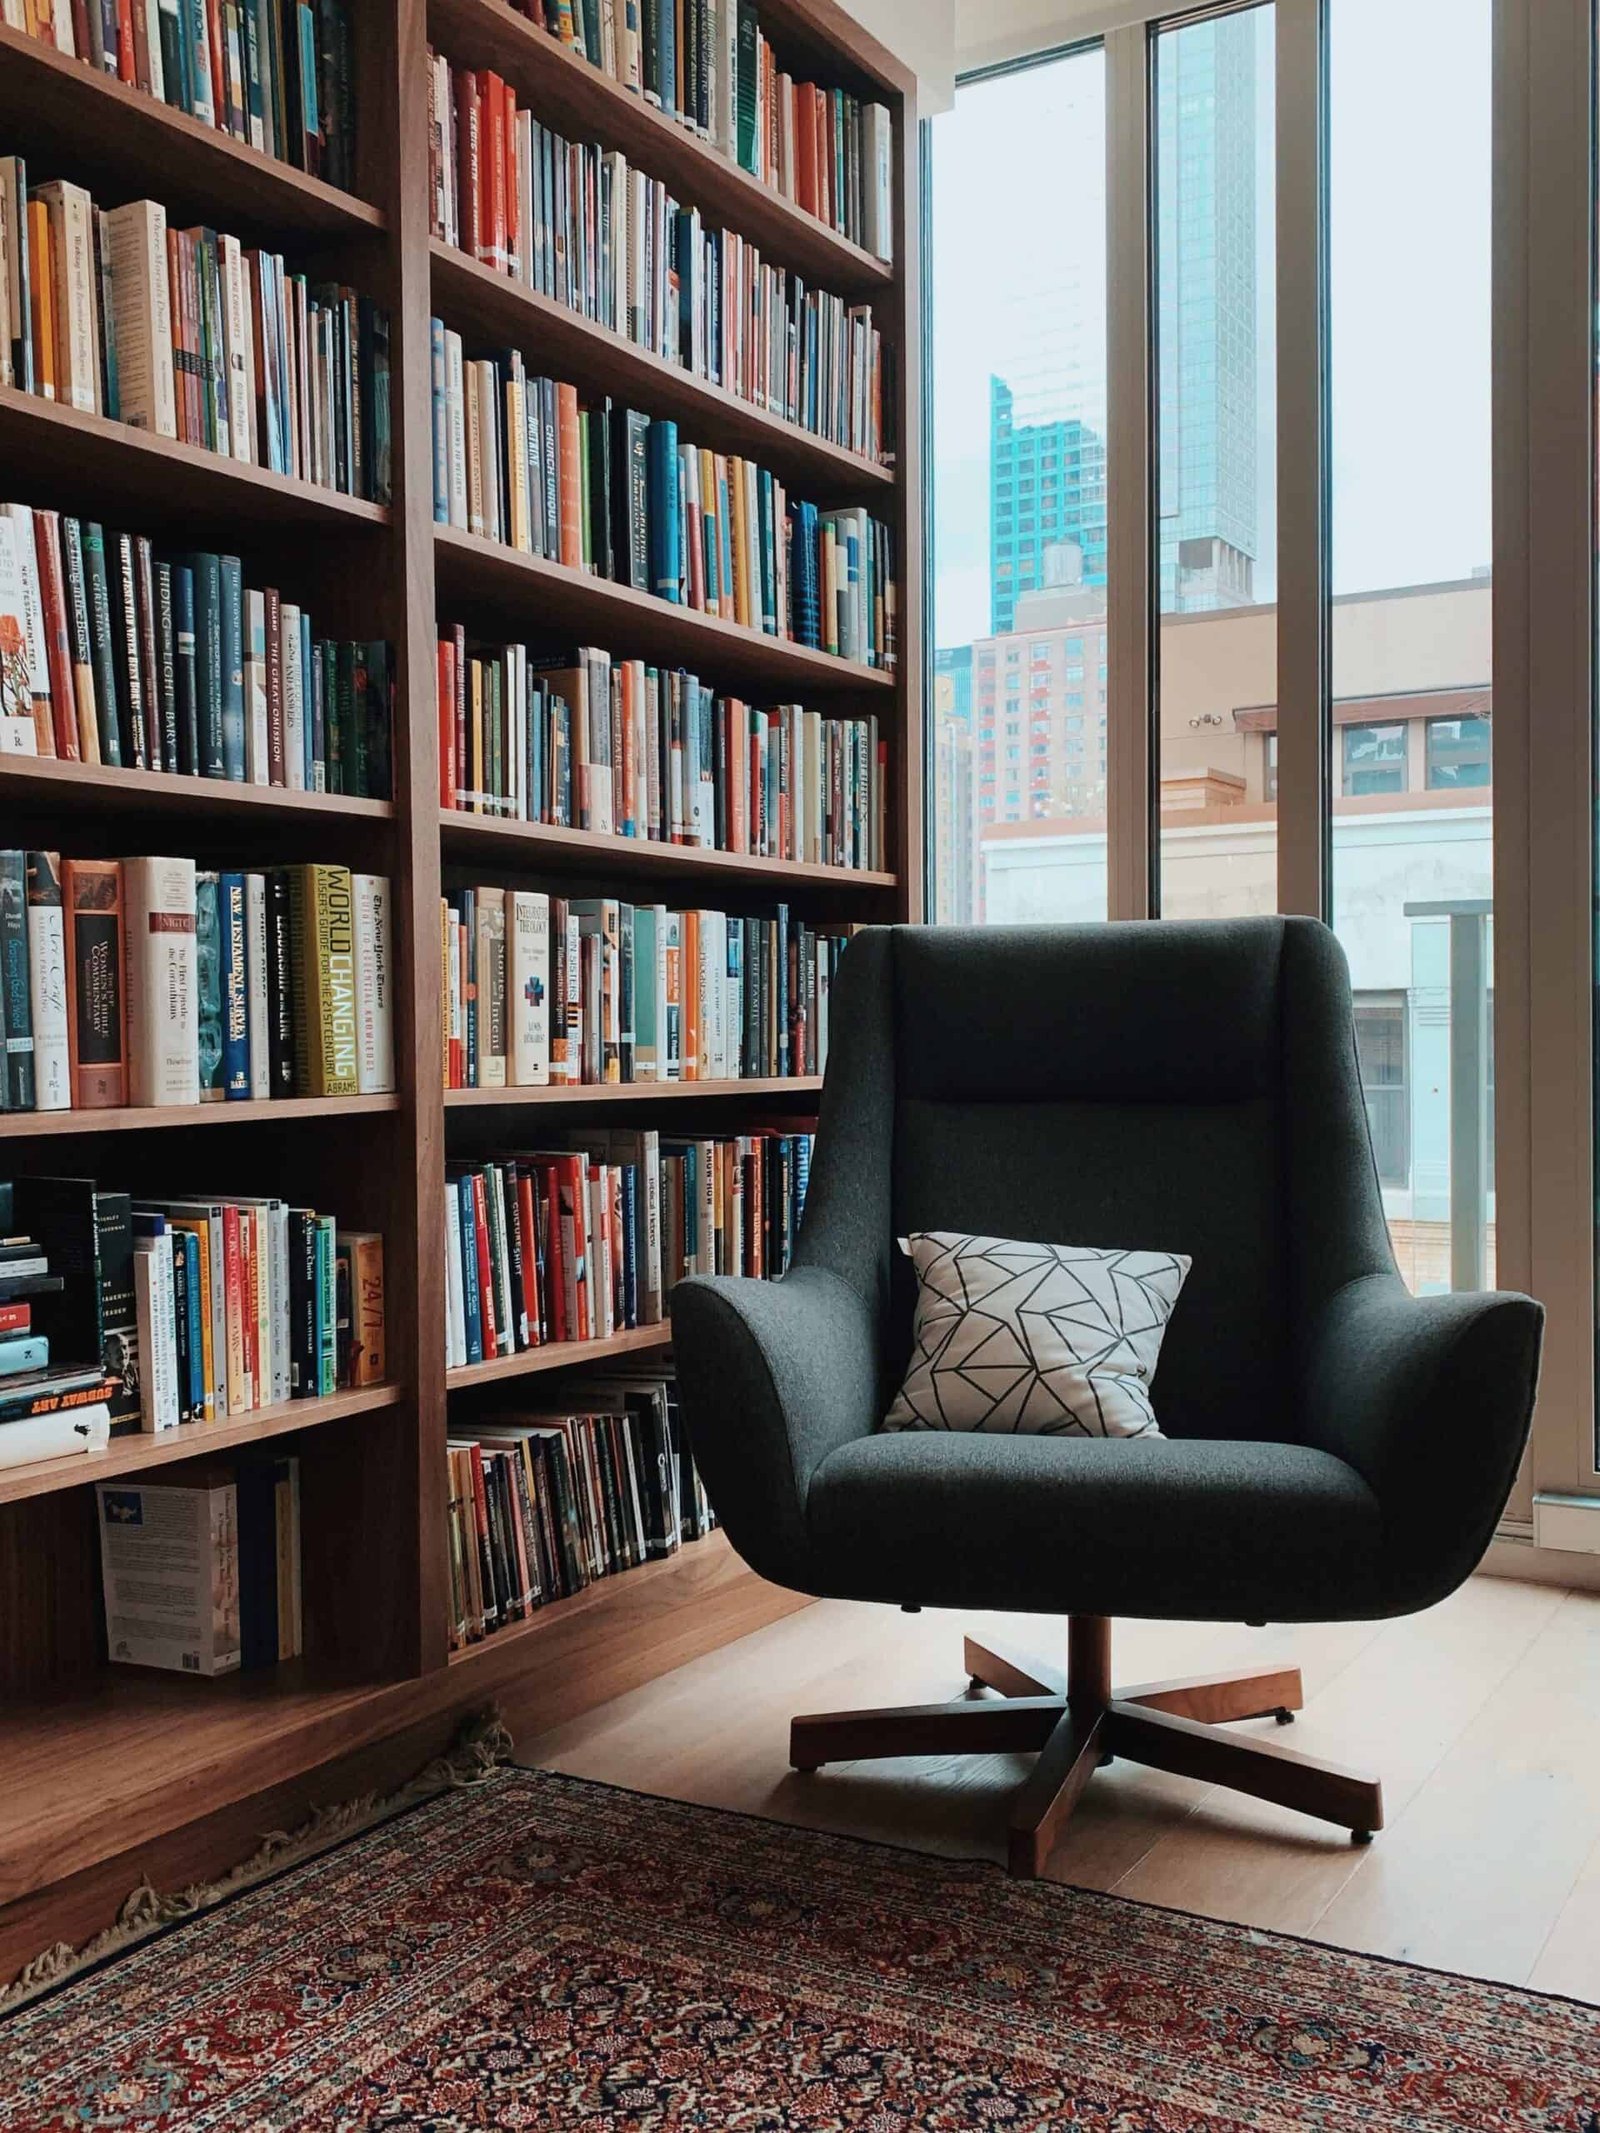 bookshelf and armchair in a study room